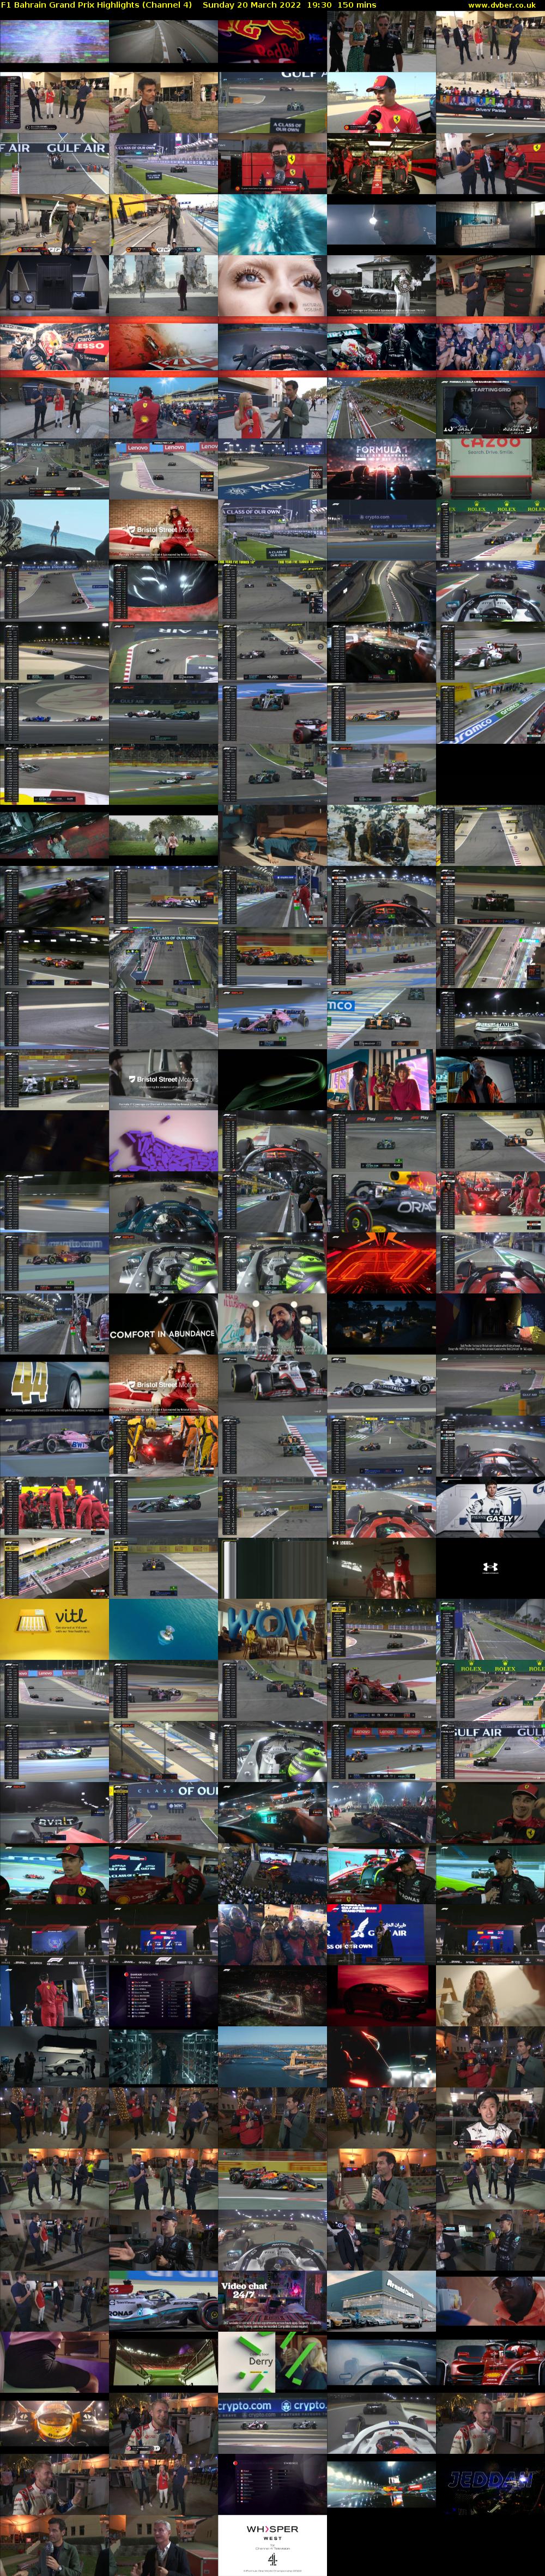 F1 Bahrain Grand Prix Highlights (Channel 4) Sunday 20 March 2022 19:30 - 22:00